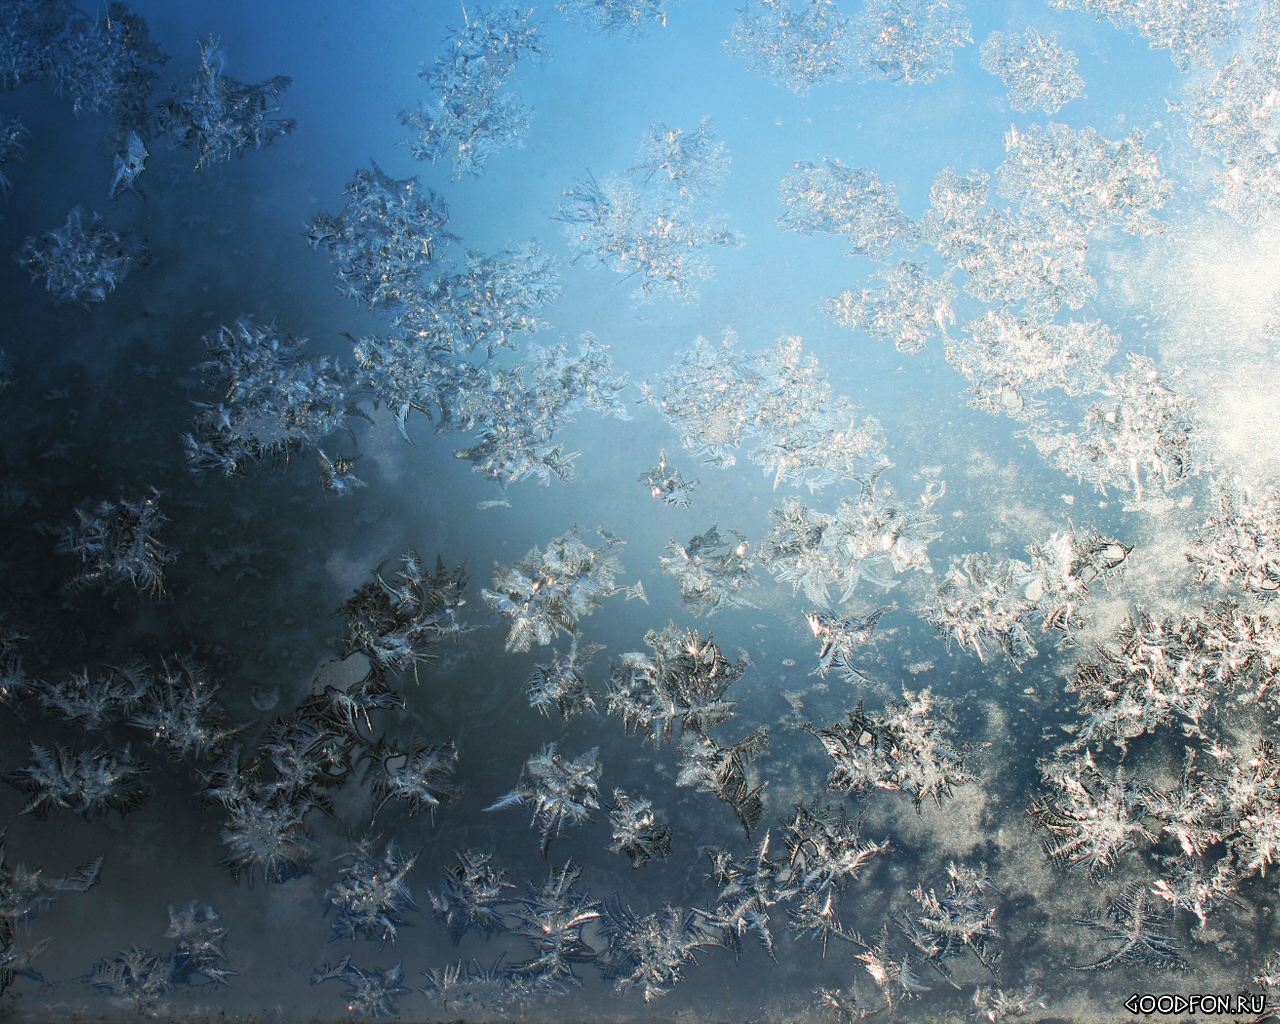 snowflakes, background, ice, blue High Definition image